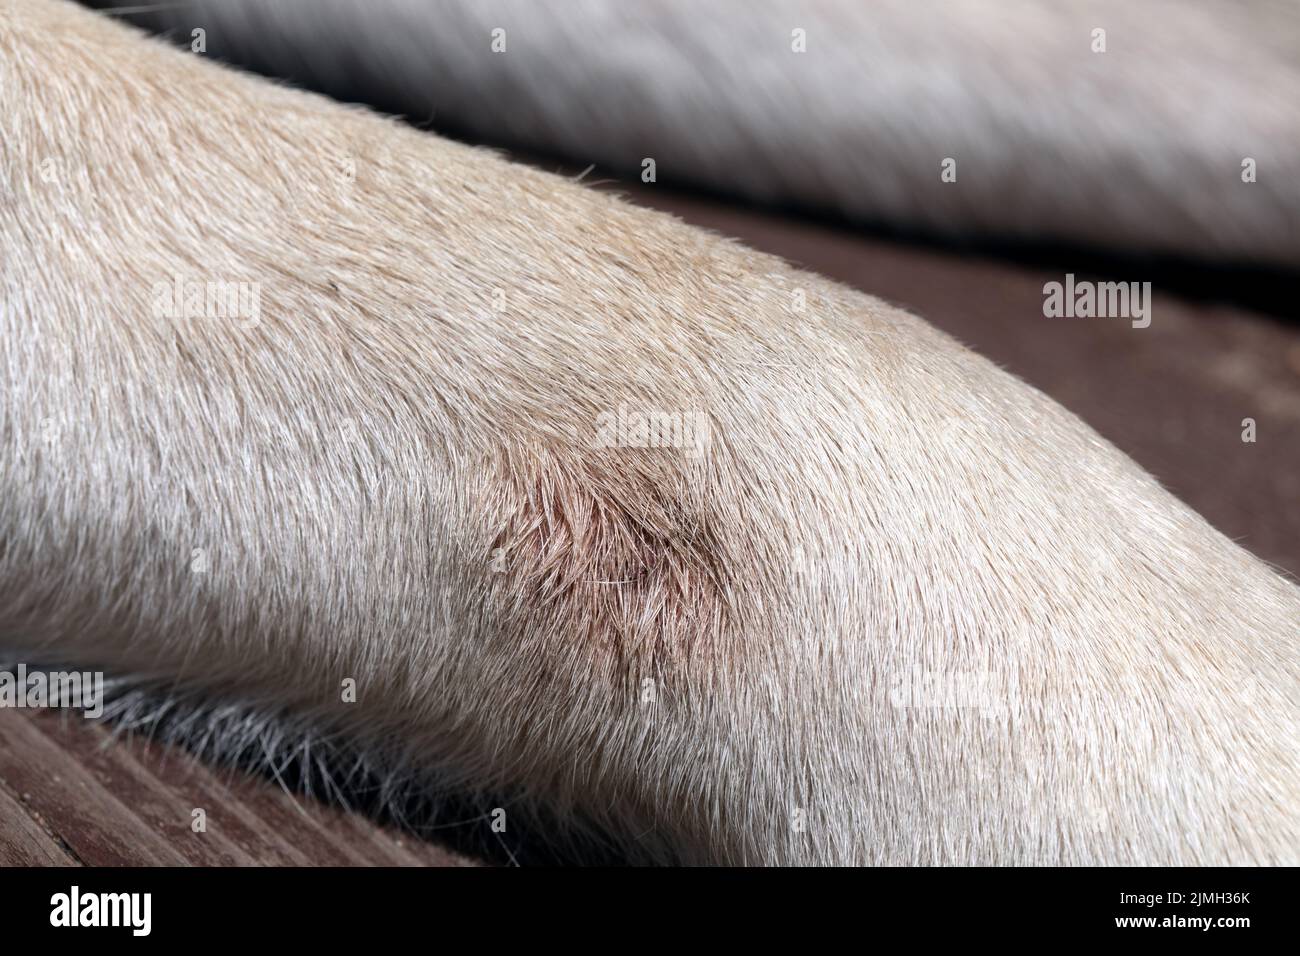 Fungal infectious disease in dogs on their paws. Stock Photo